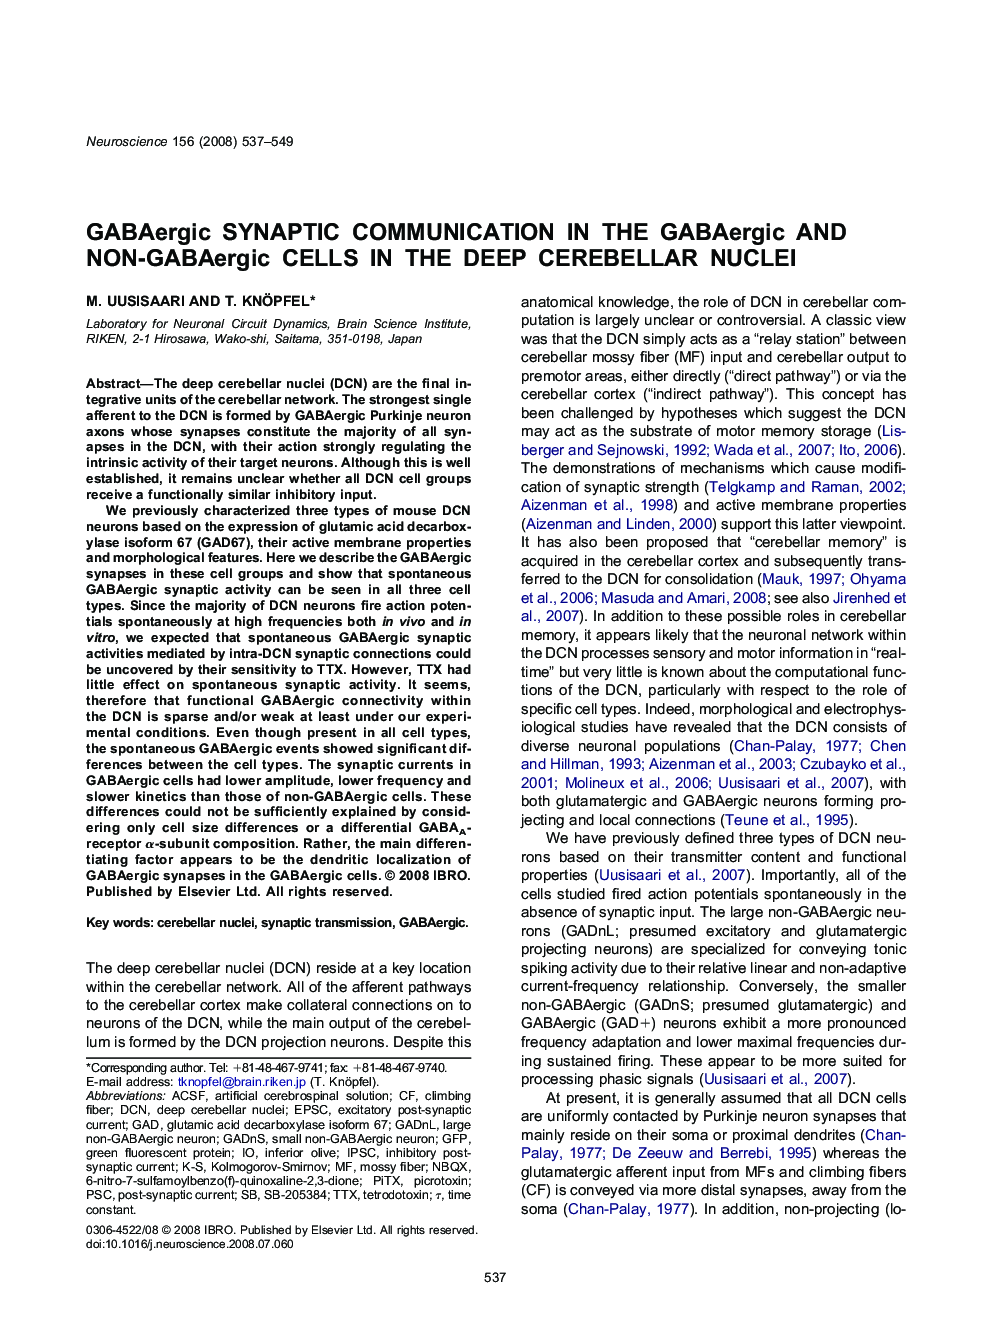 GABAergic synaptic communication in the GABAergic and non-GABAergic cells in the deep cerebellar nuclei